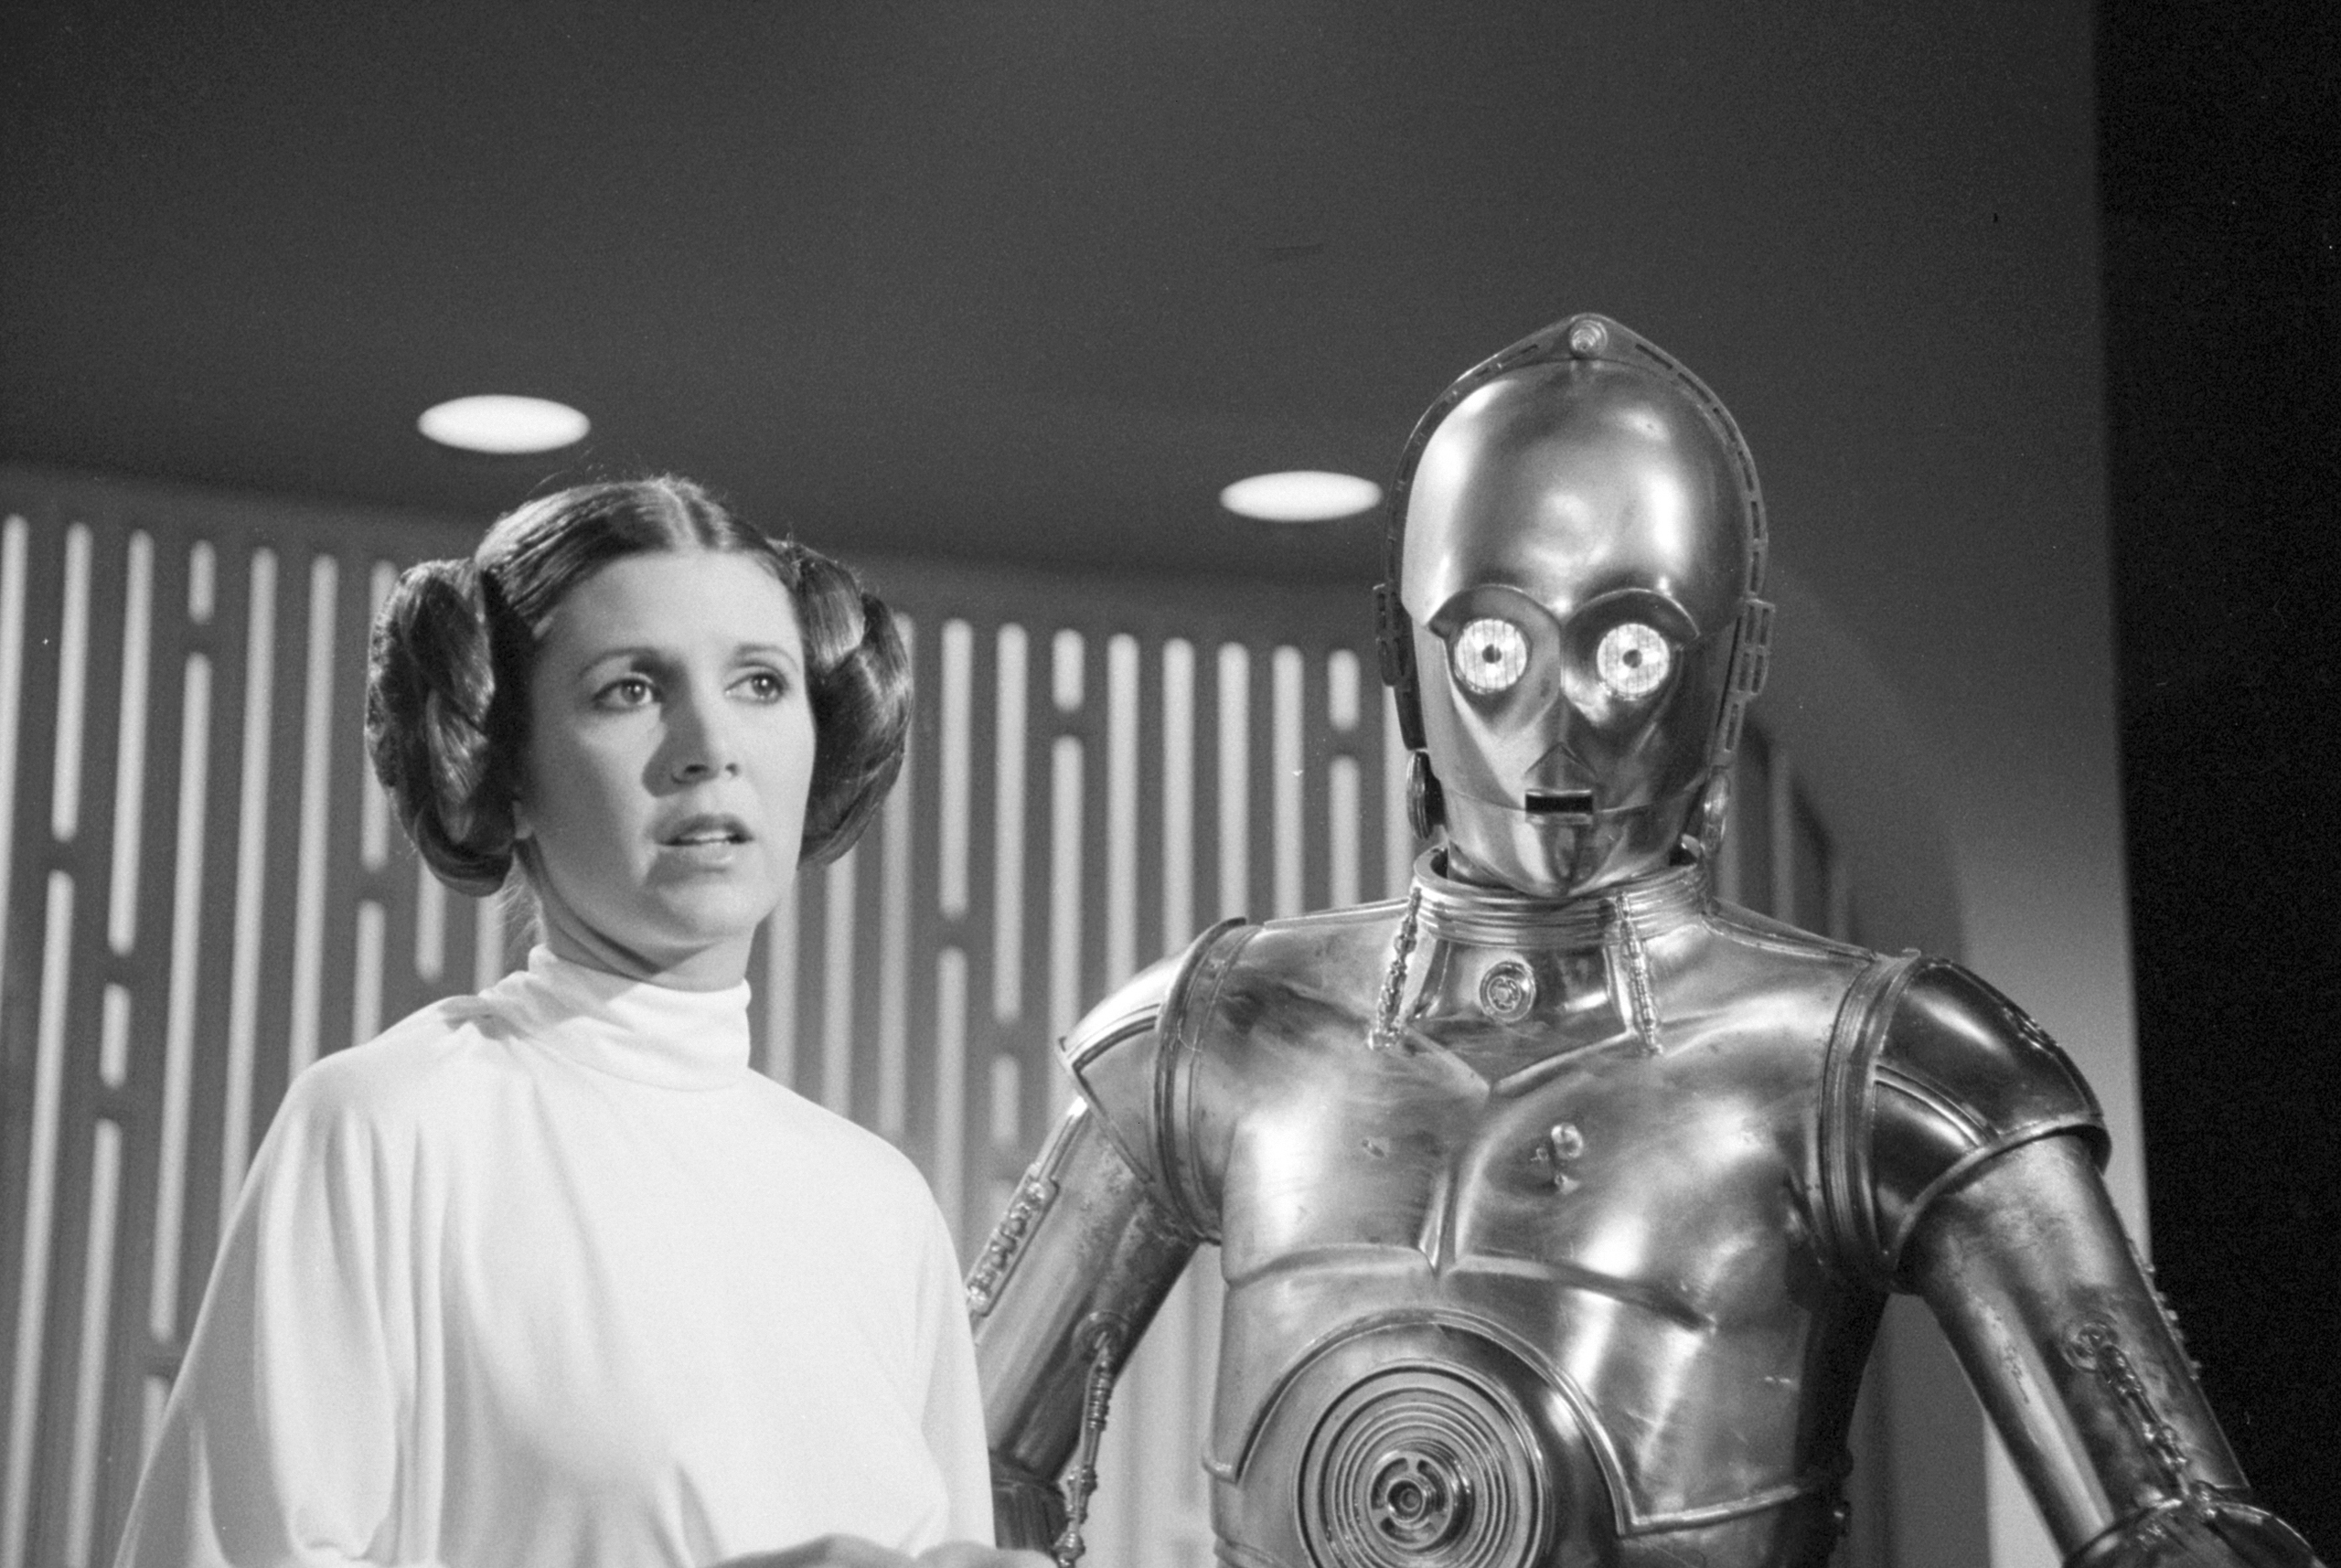 Carrie Fisher as Princes Leia and Anthony Daniels as C3PO  on Aug. 23, 1978. (CBS/Getty Images)